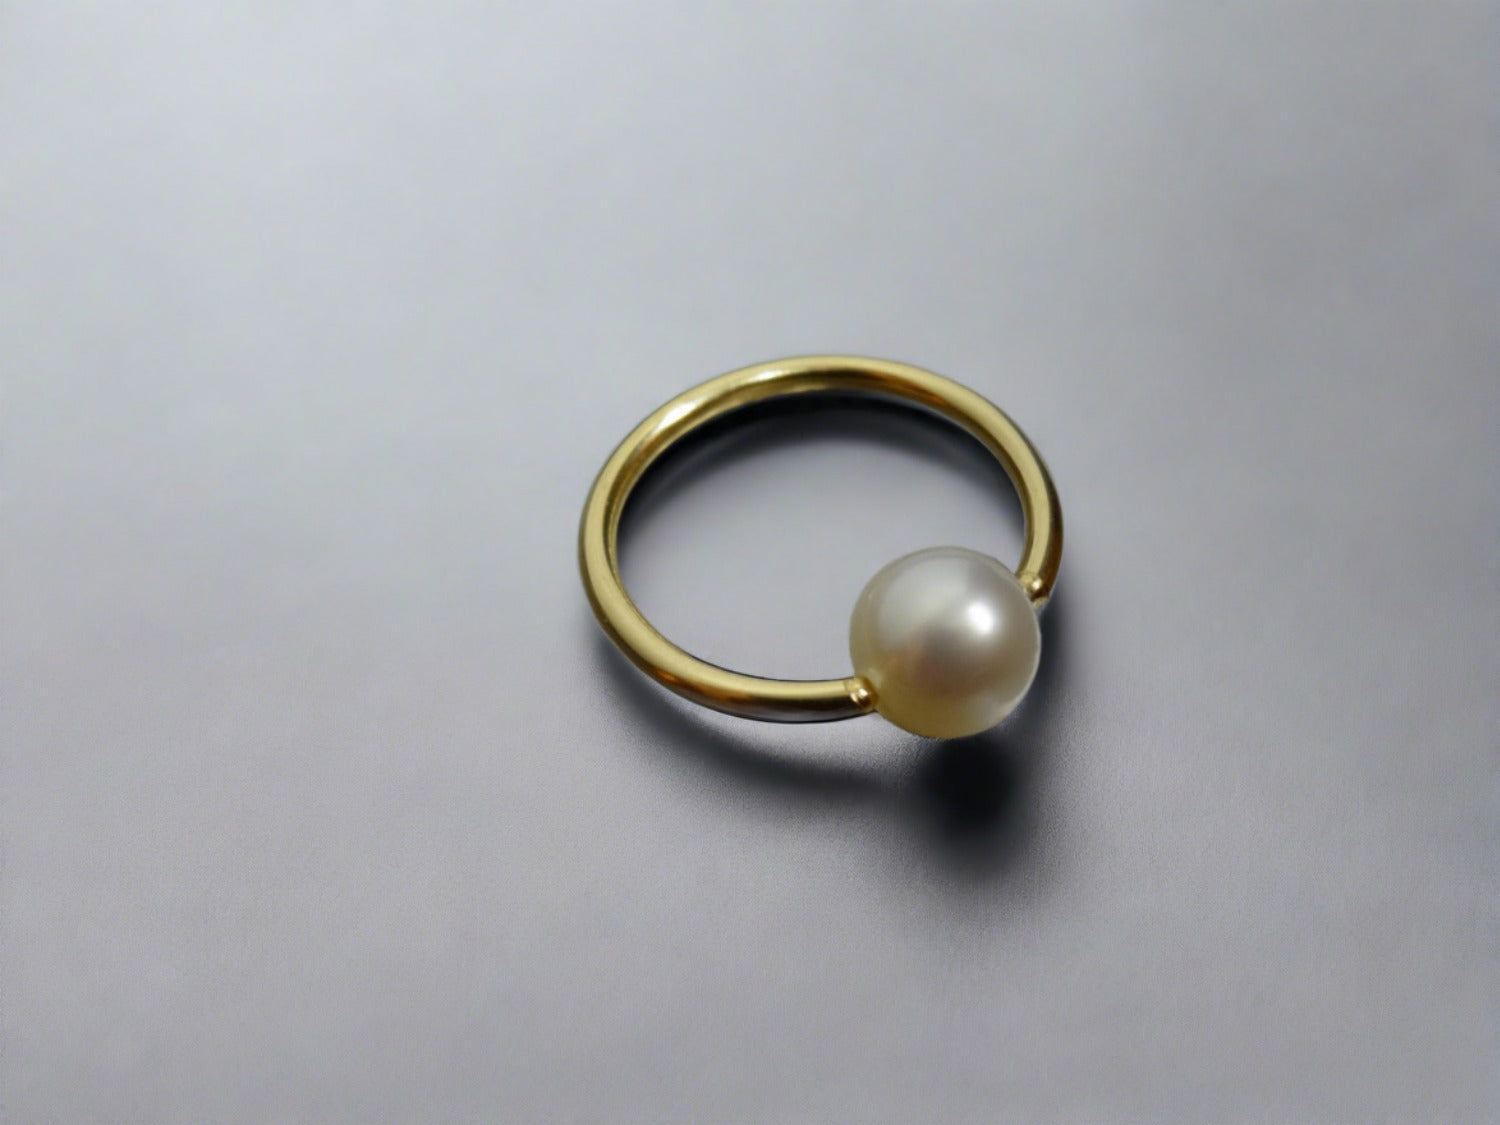 6mm White Pearl Captive Bead Ring - 14 ga Hoop - 14k Gold (Y, W, or R), Sterling Silver, or Platinum